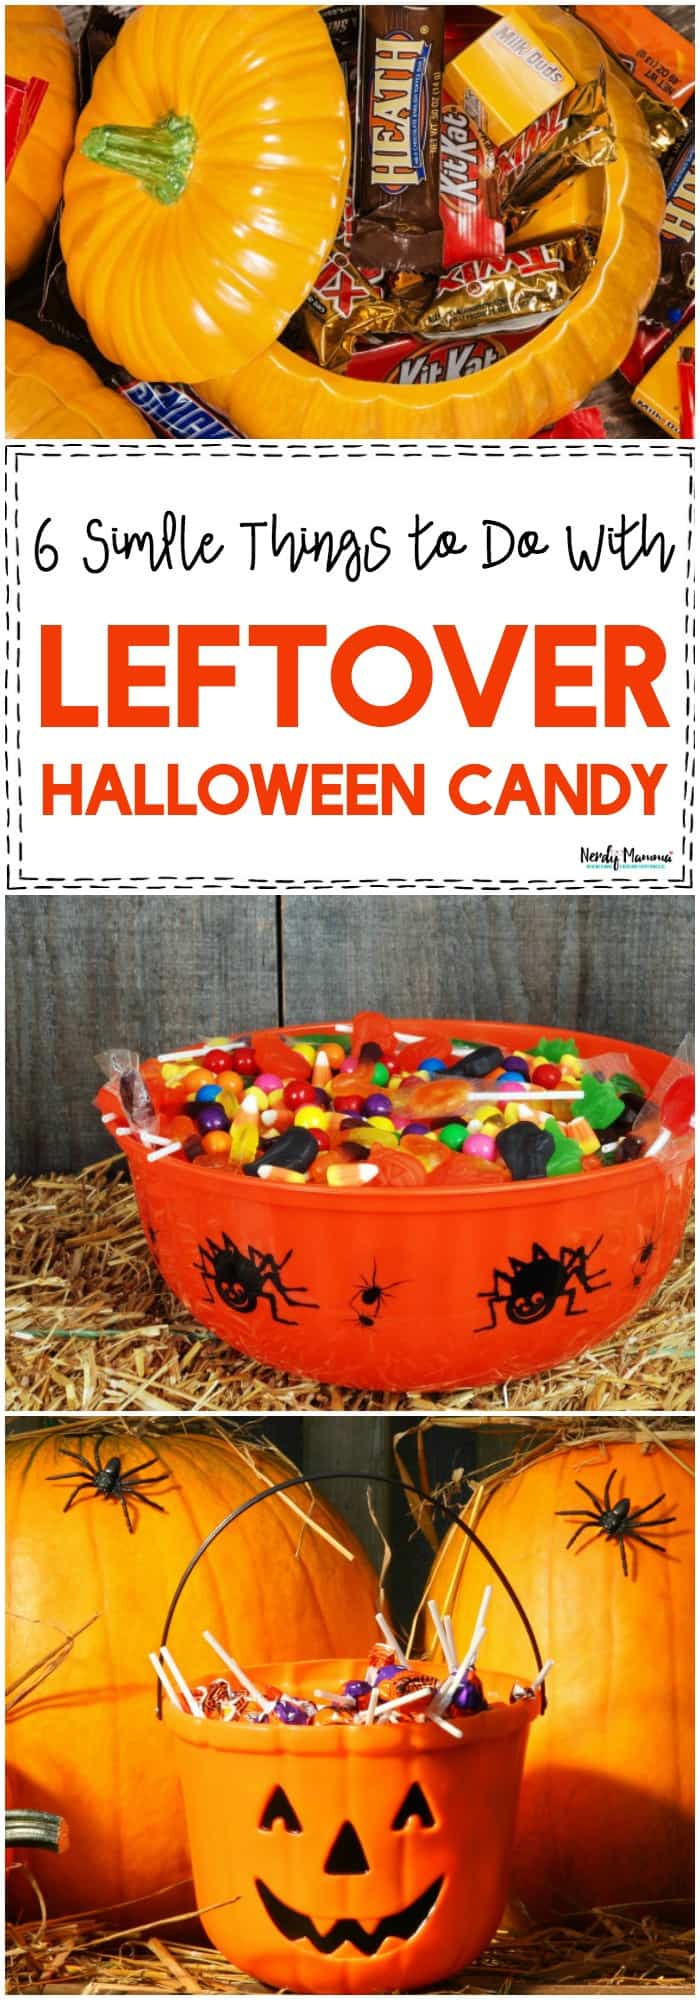 OMG, I always have so much leftover candy and I don't want to eat it all myself. These are GREAT options.